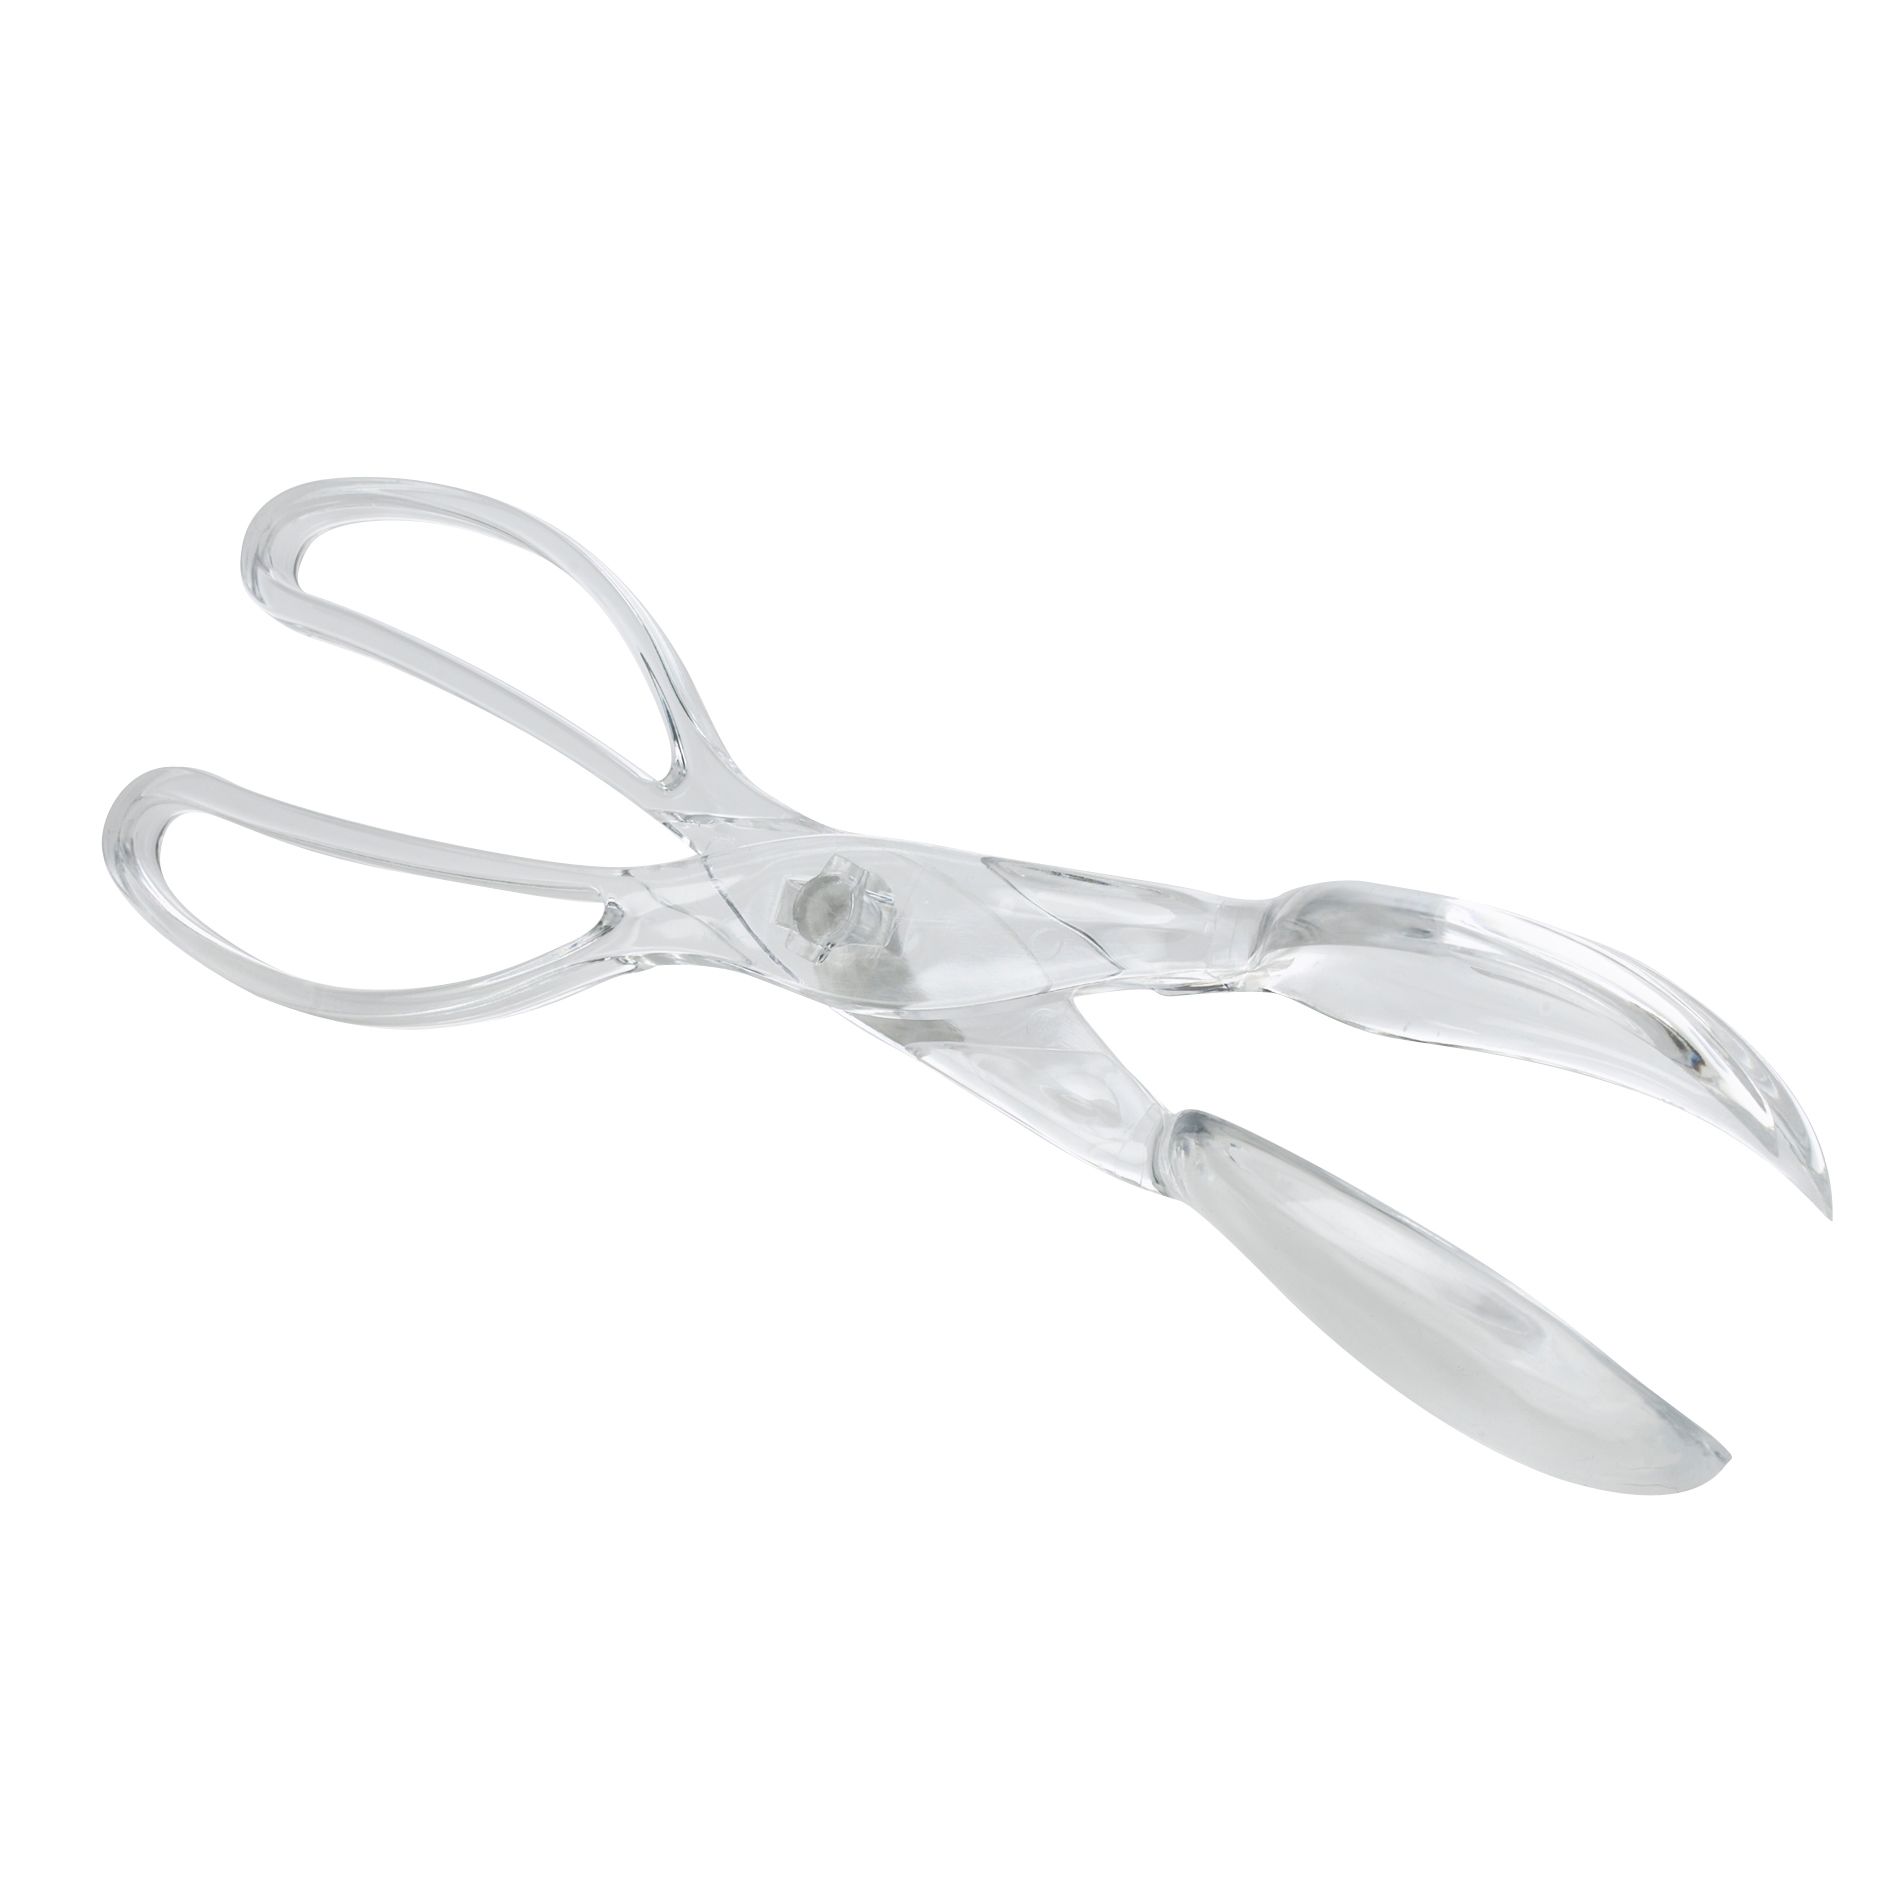 Essential Home Salad Tongs